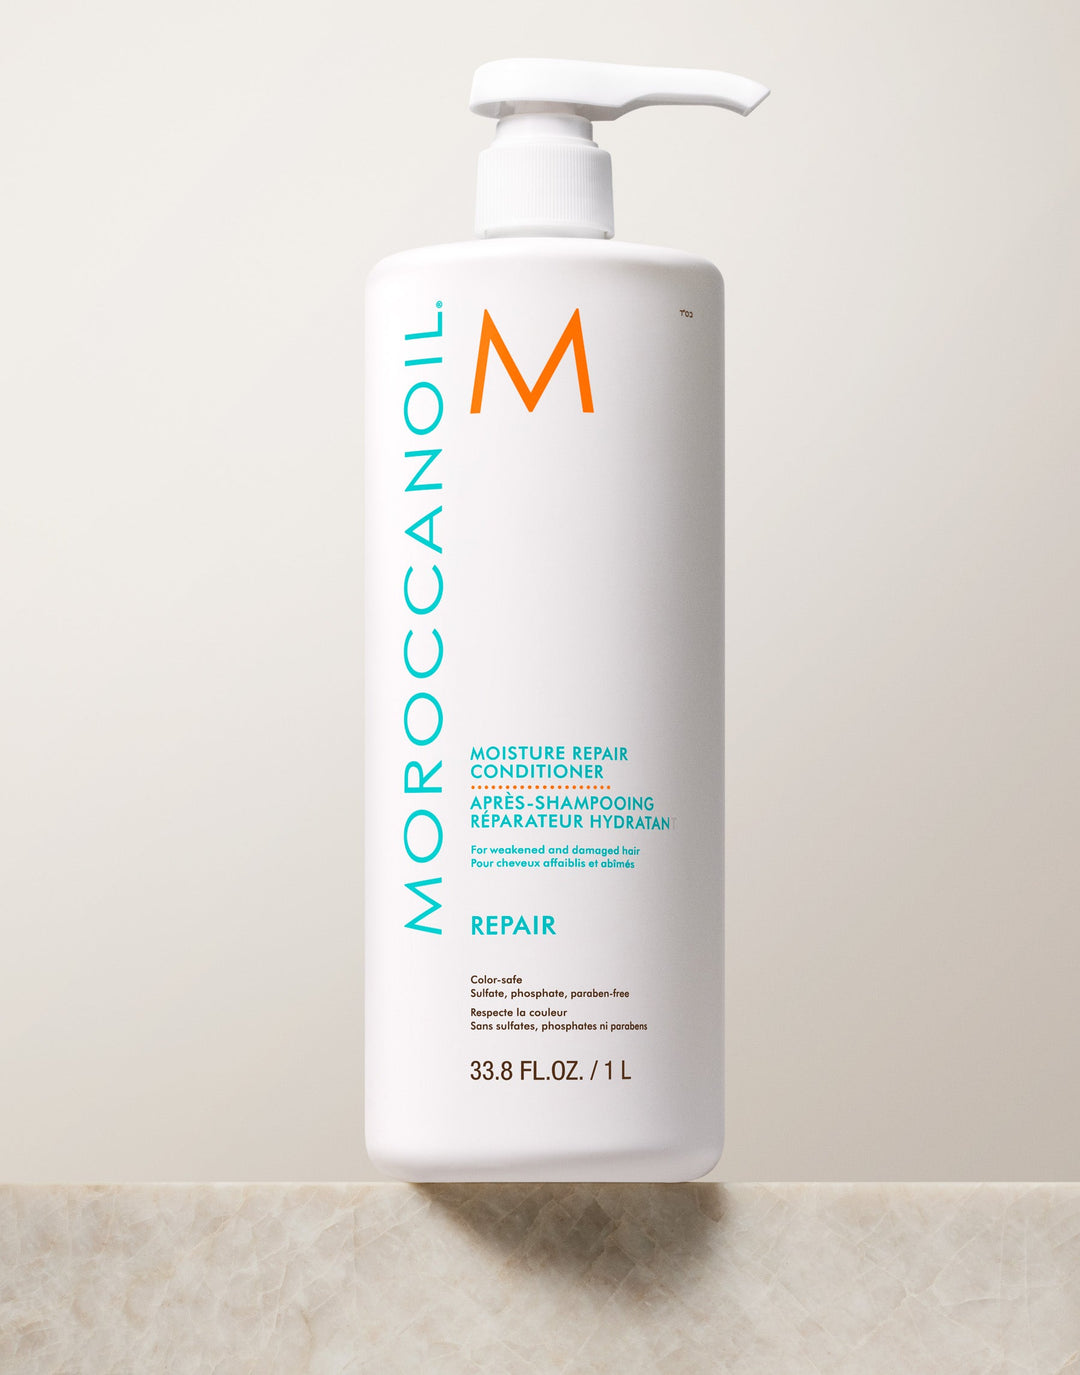 Moisture Repair Conditioner For weakened and damaged hair